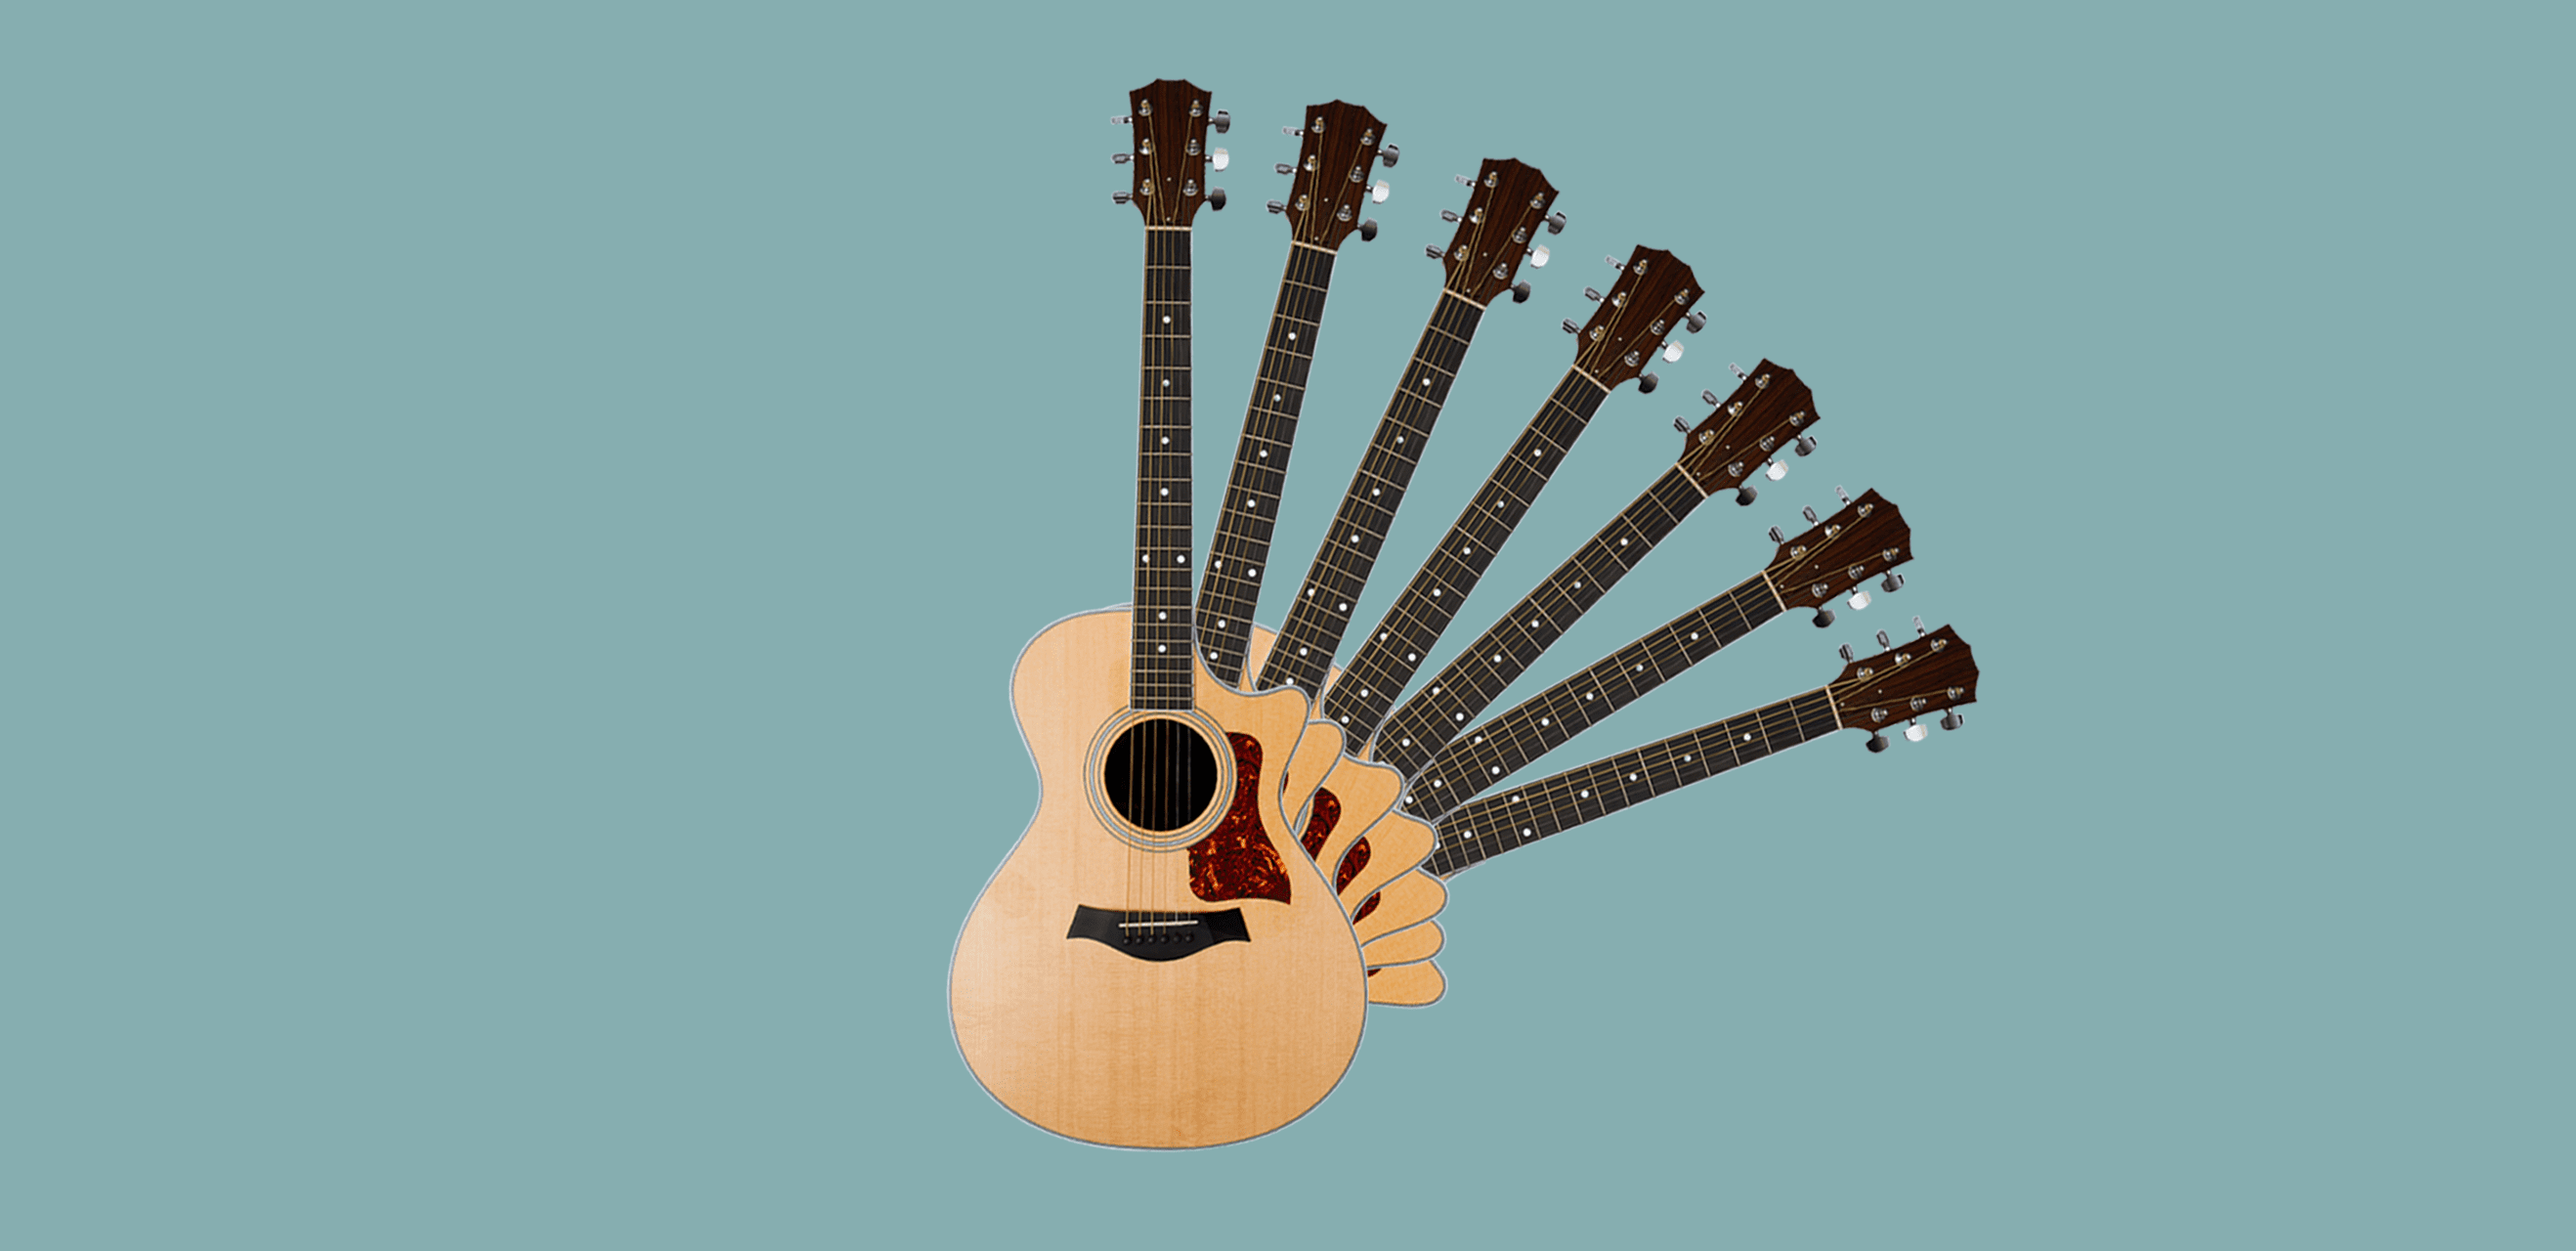 The Acoustic Guitar Ensemble is Available Now